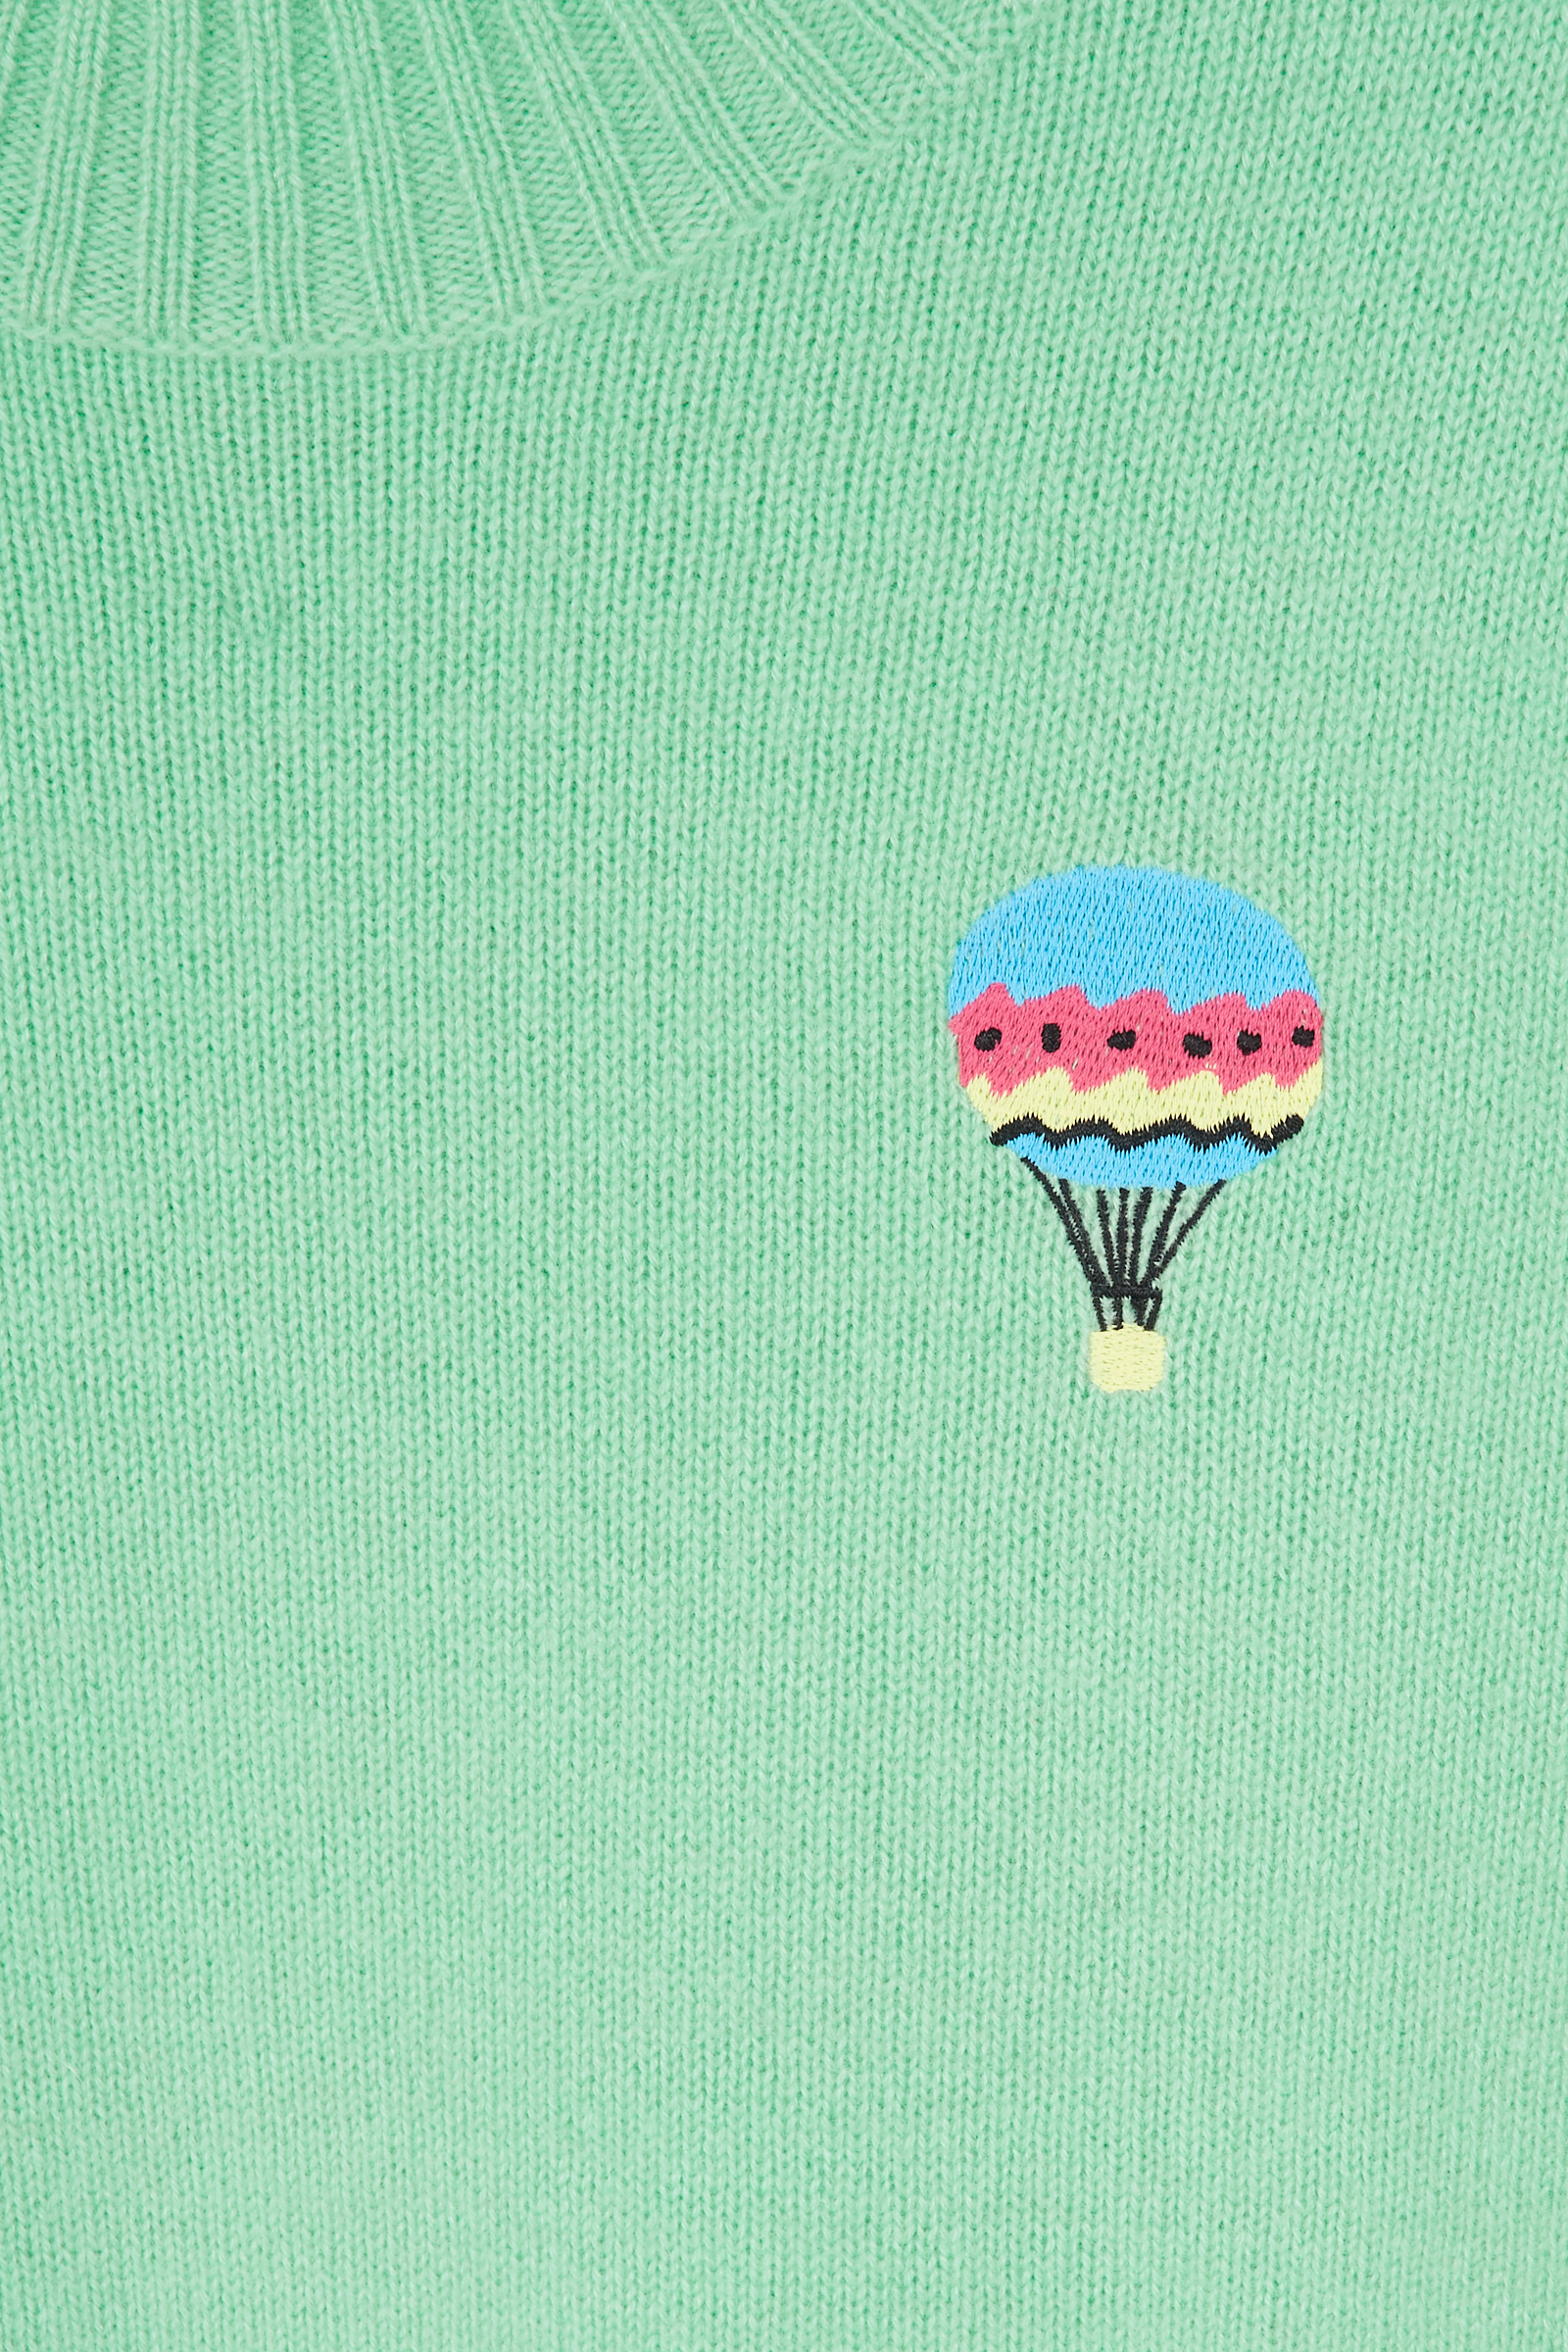 Embroidered Hot Air Balloon Cashmere Knit 